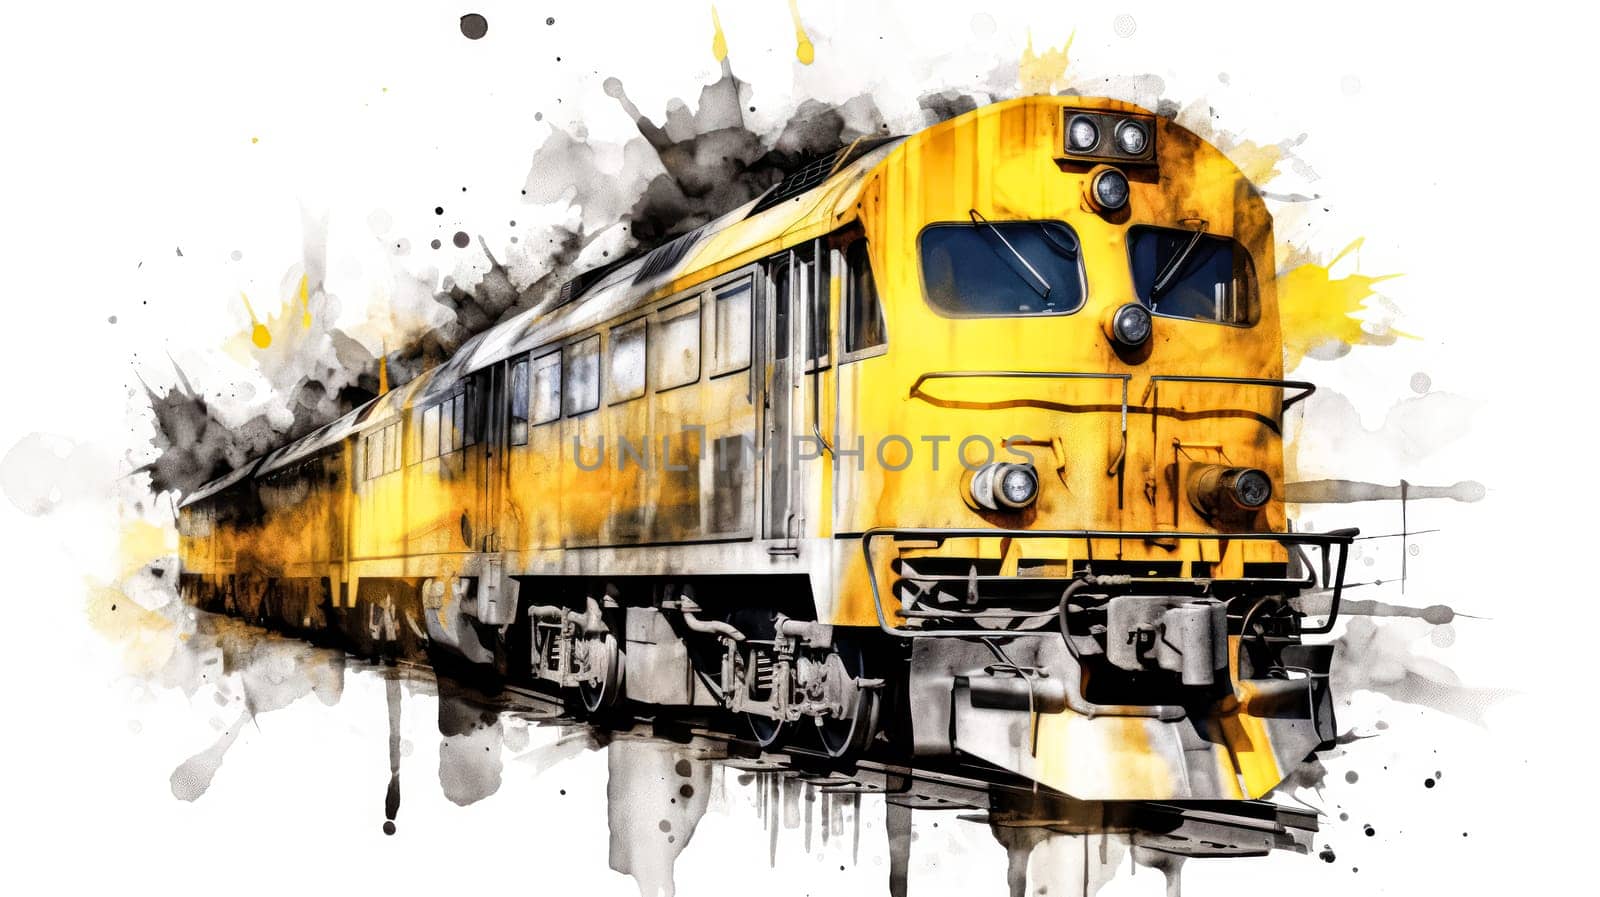 A charming watercolor sketch of a train with yellow gray lines by Alla_Morozova93